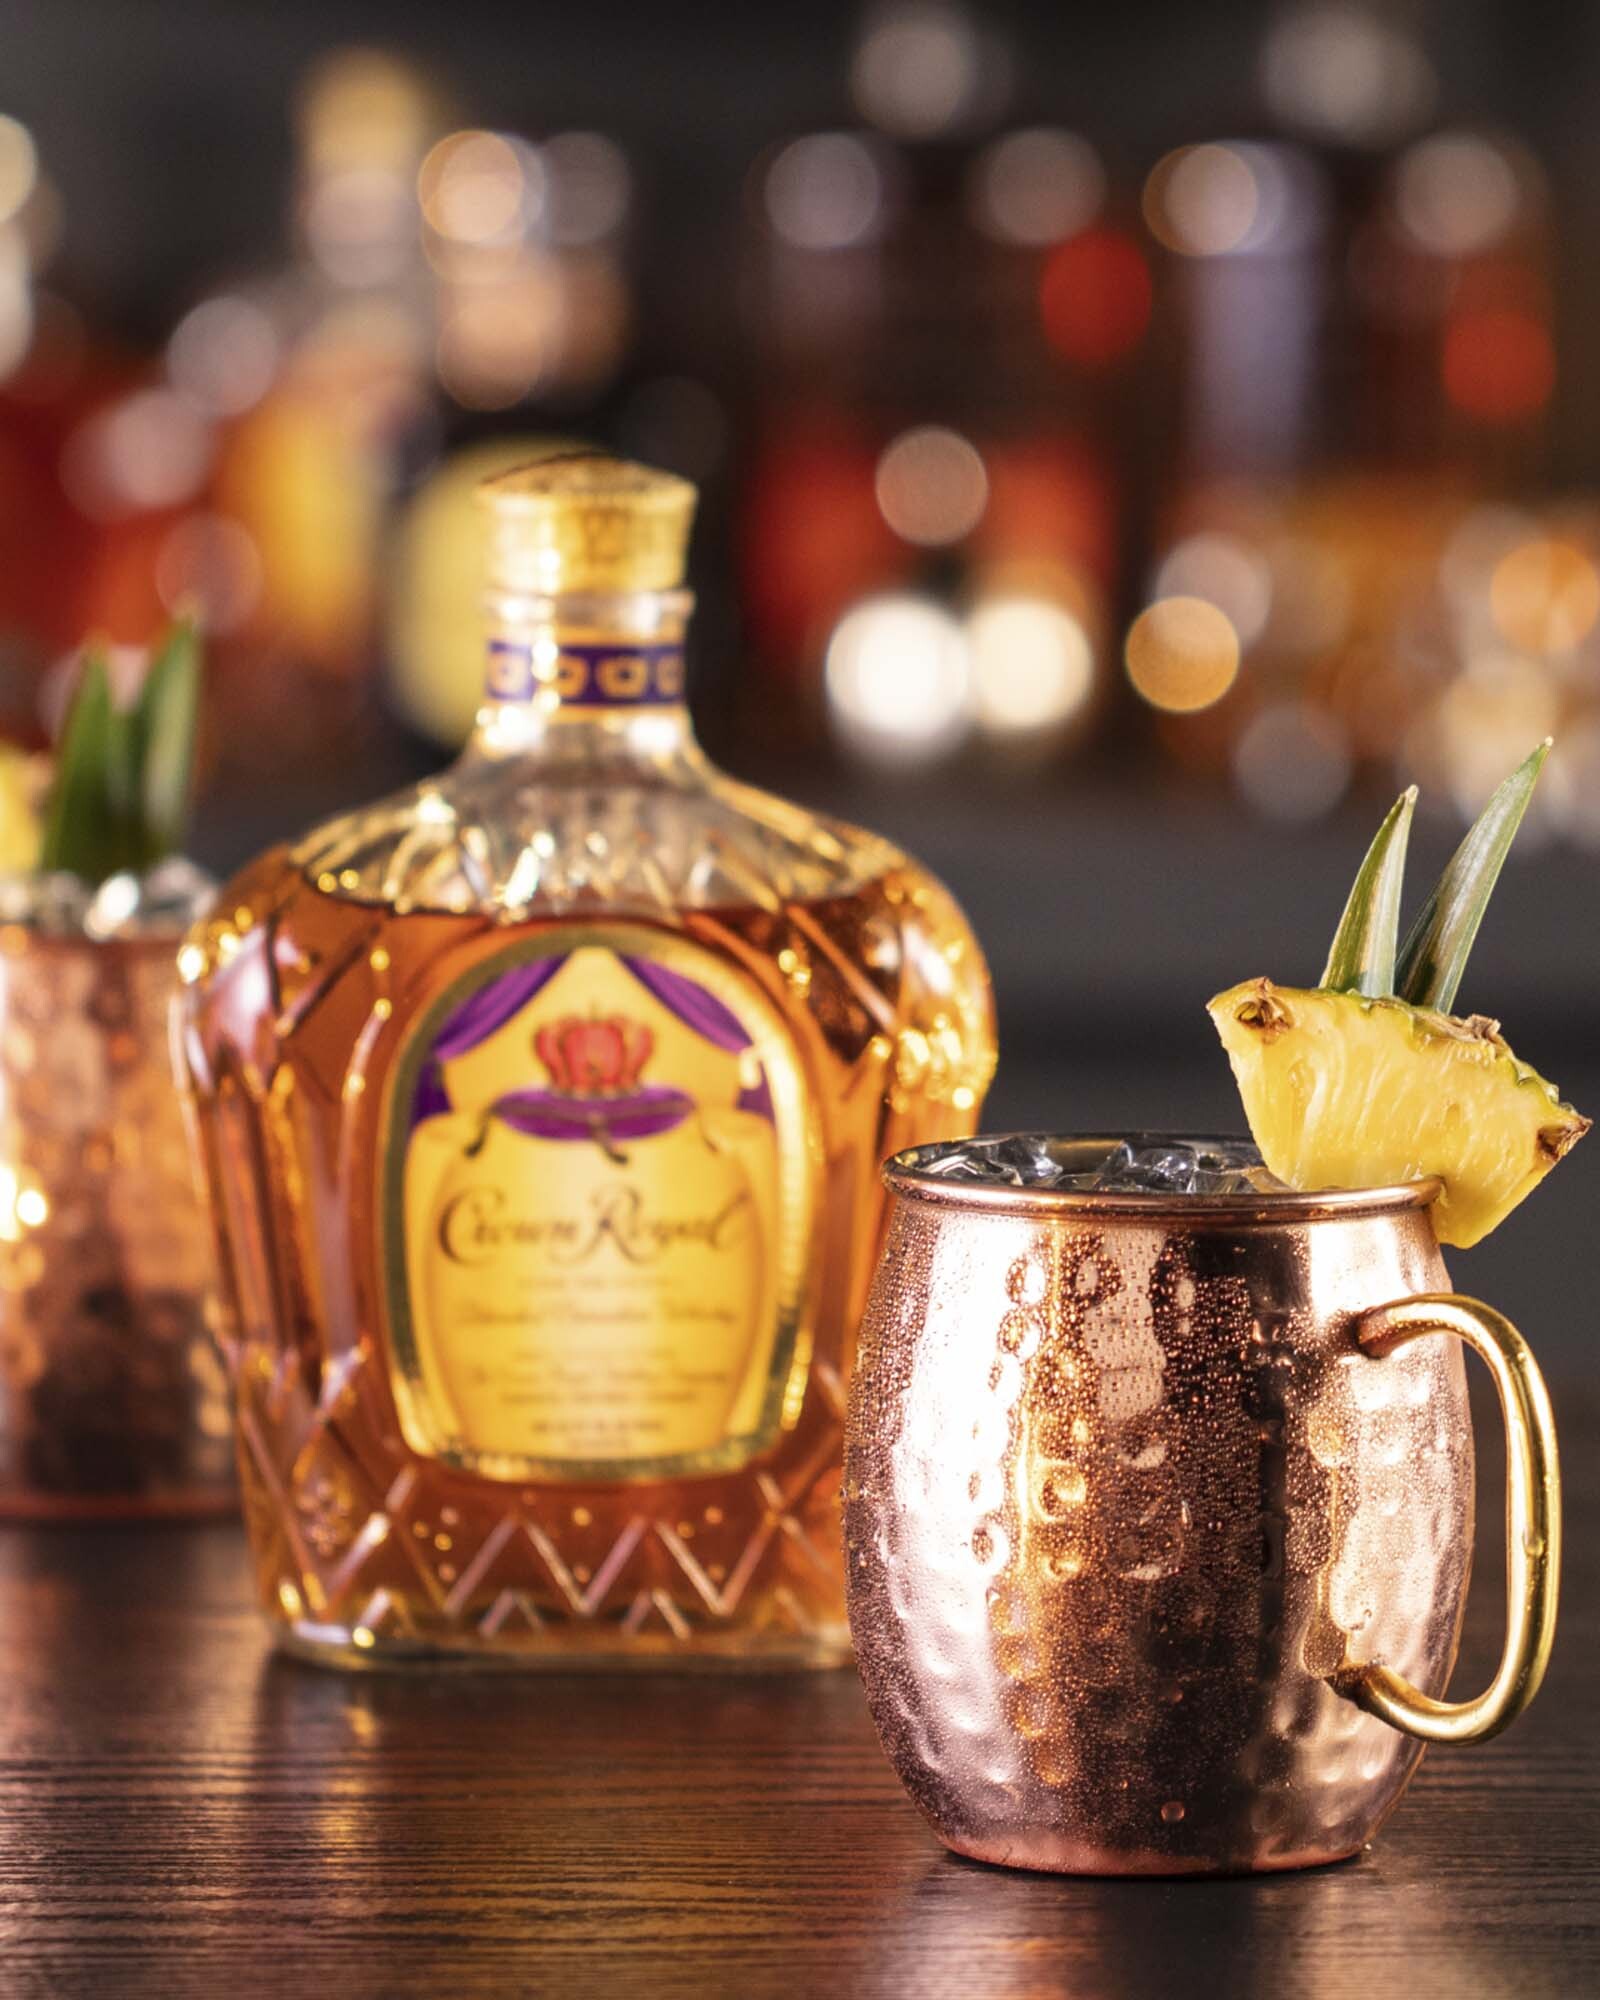 Crown Royal Deluxe Pineapple Mule Whisky Cocktail